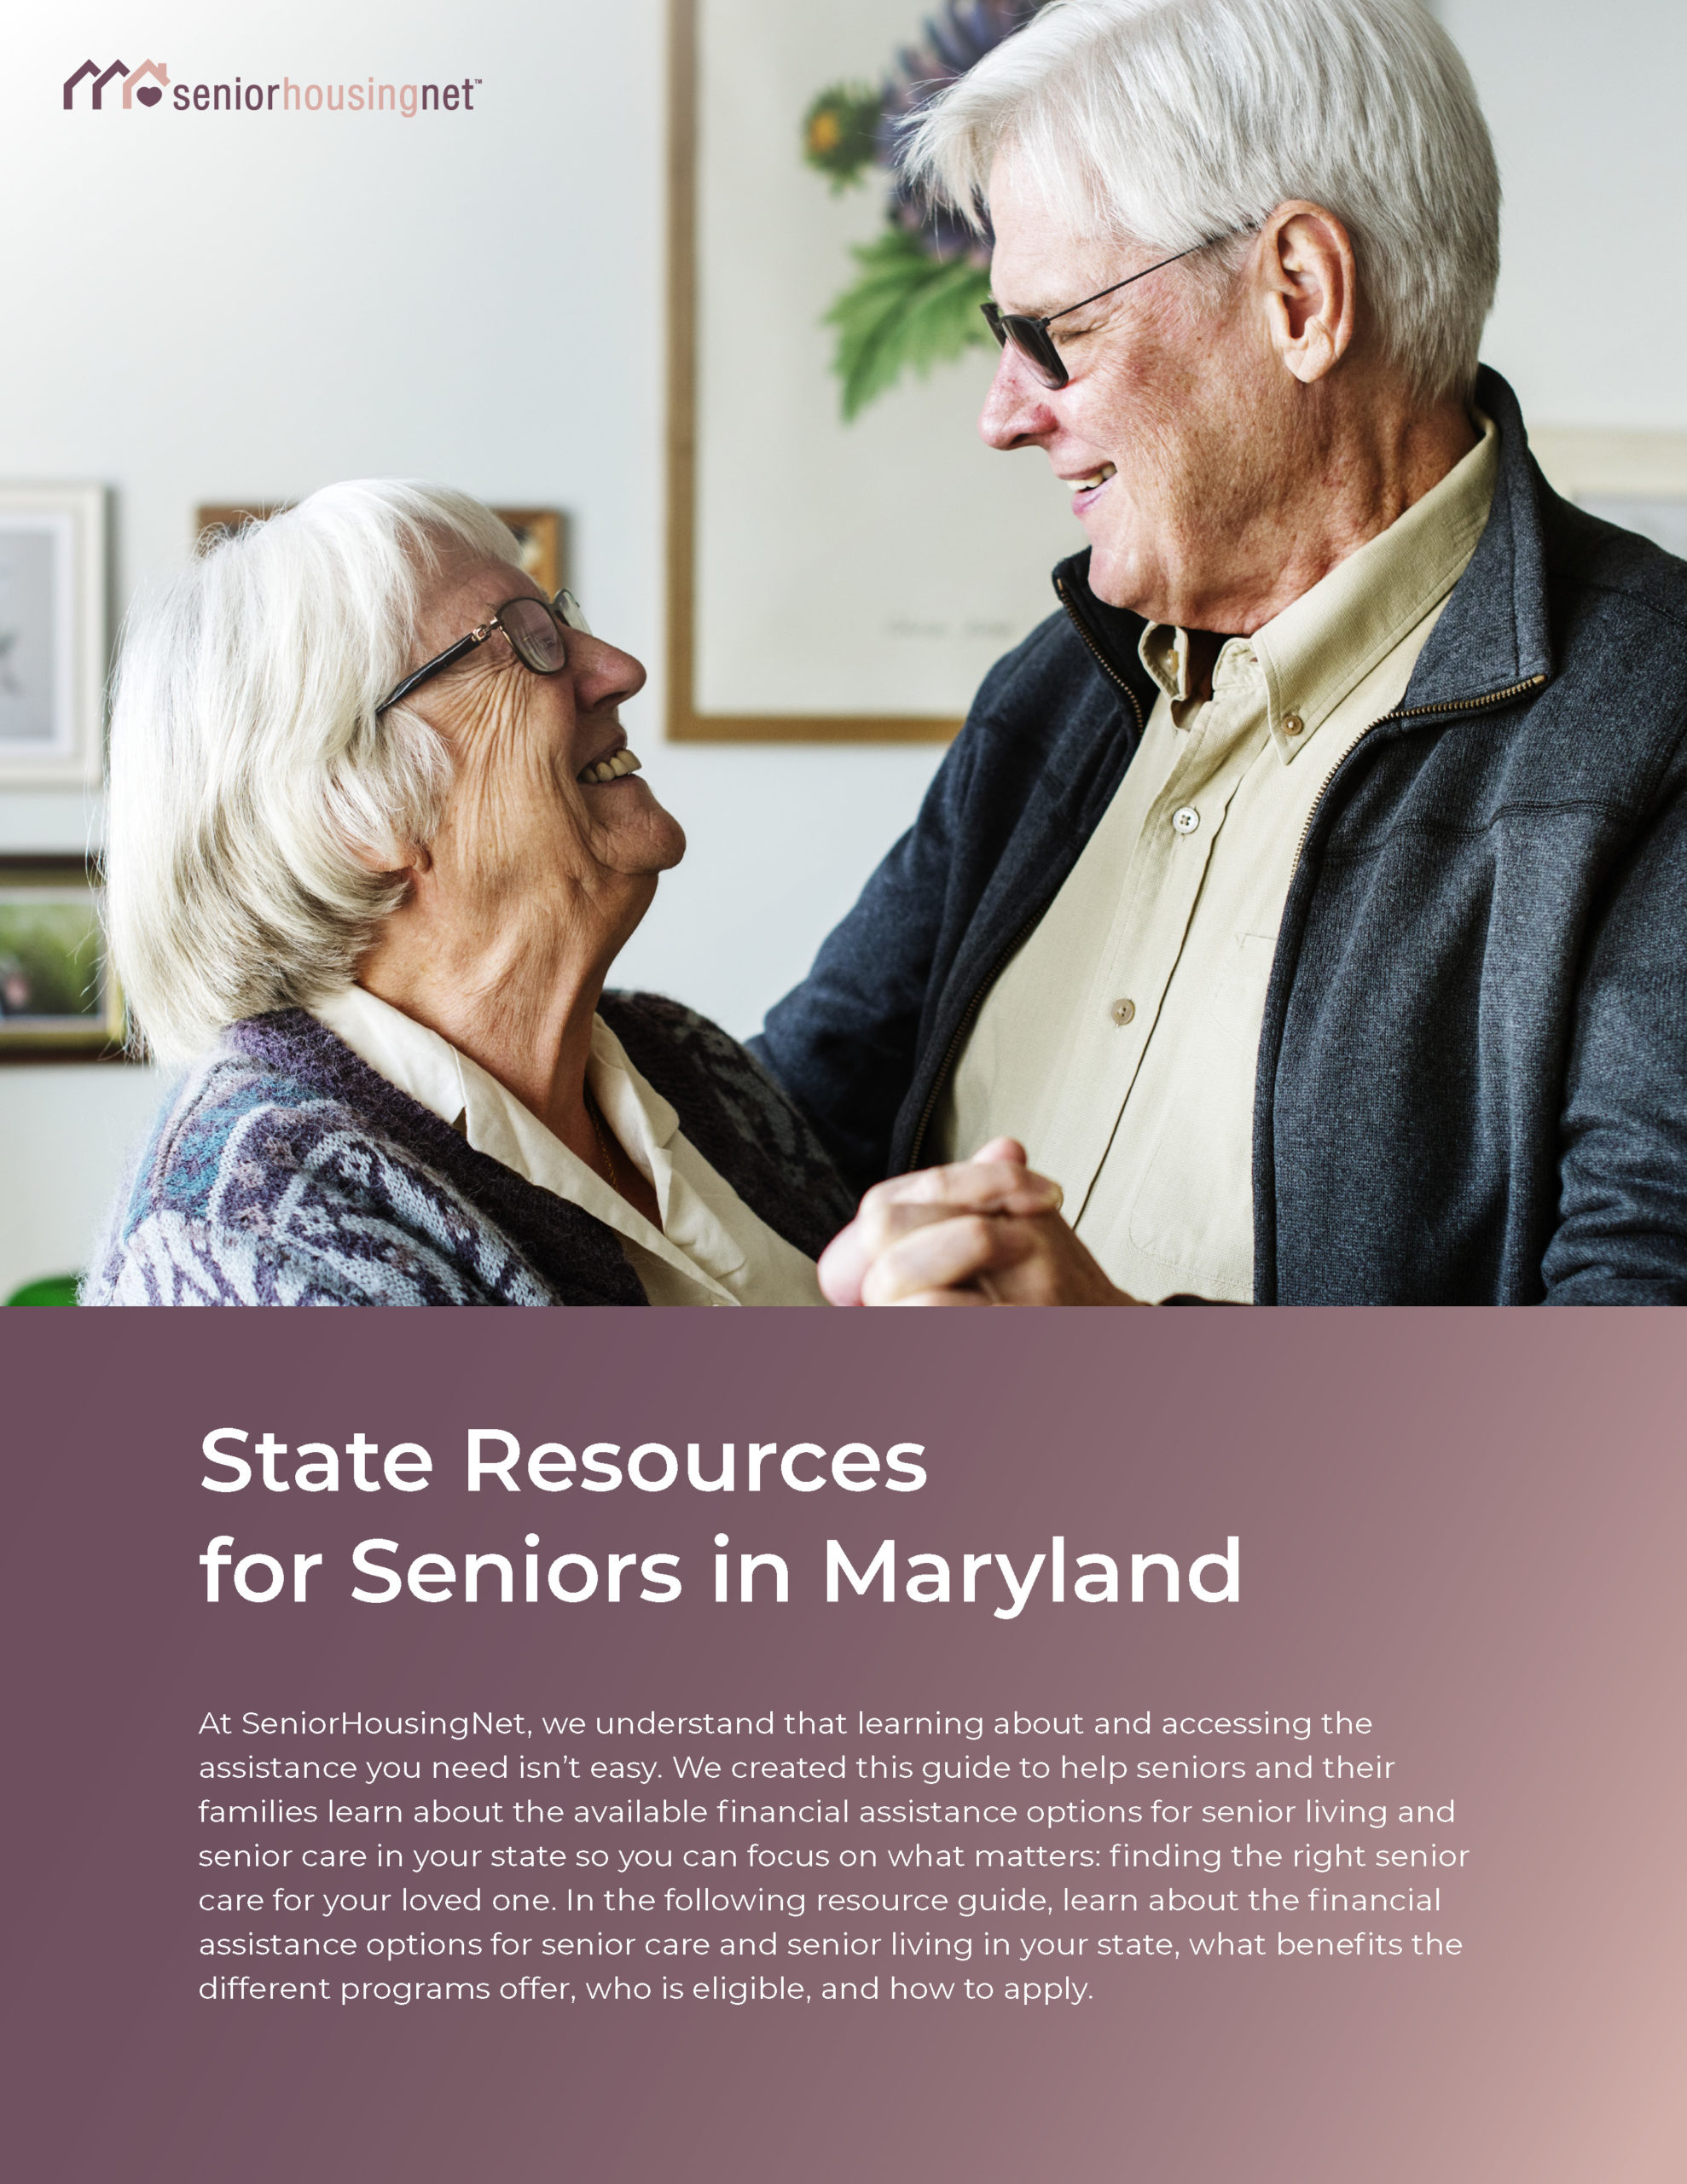 State Resources for Seniors in Maryland